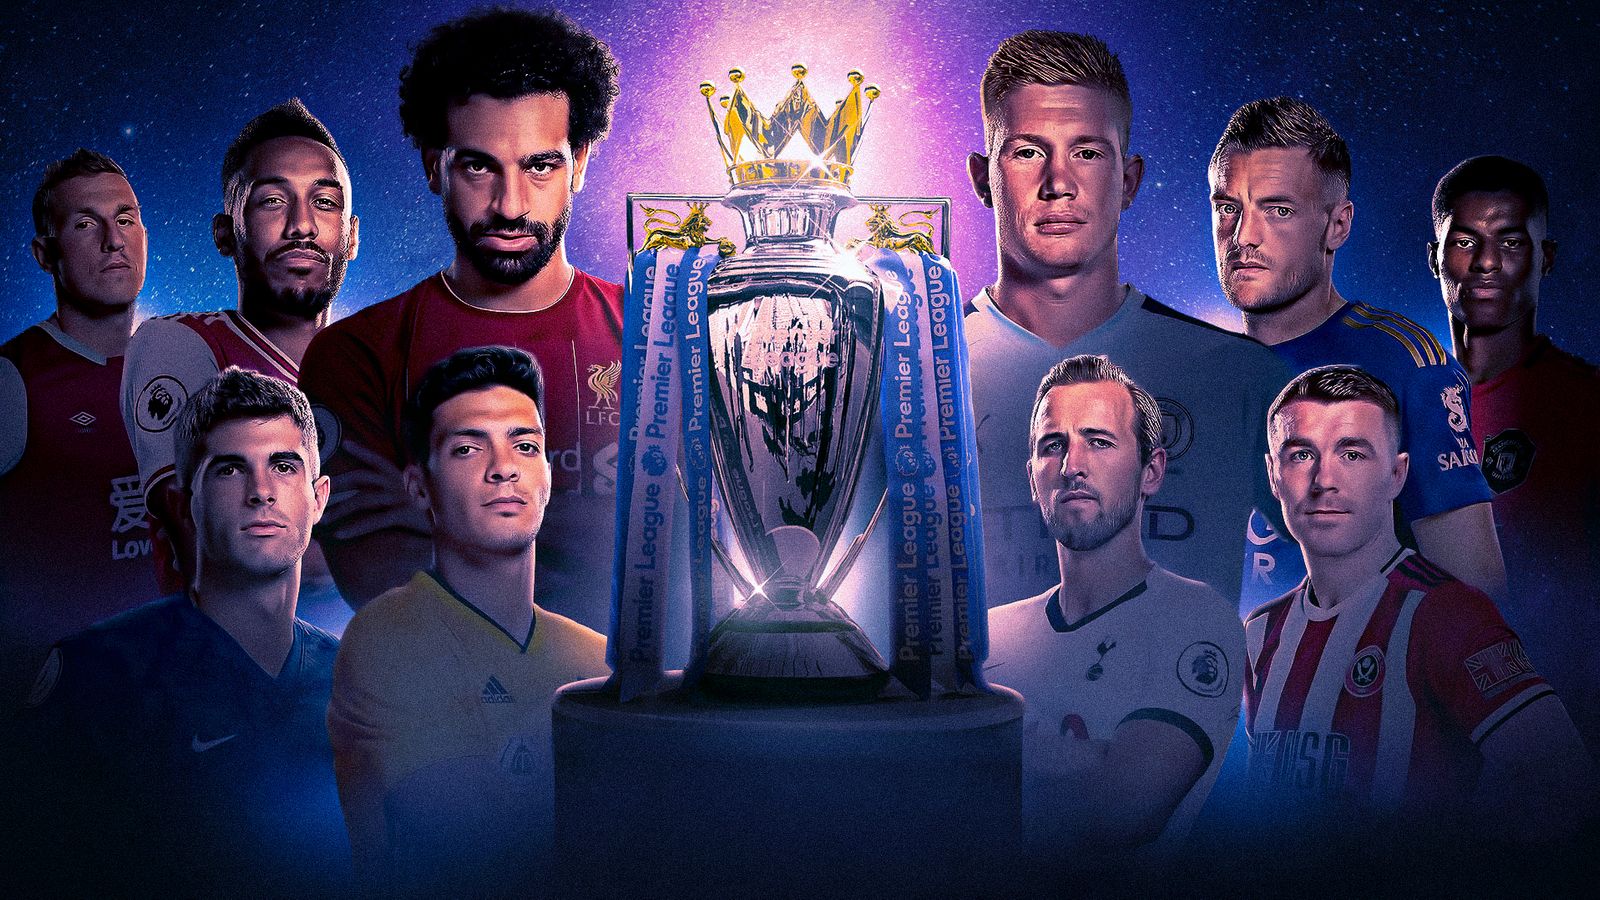 Back in the game: here comes the Premier League again, Premier League